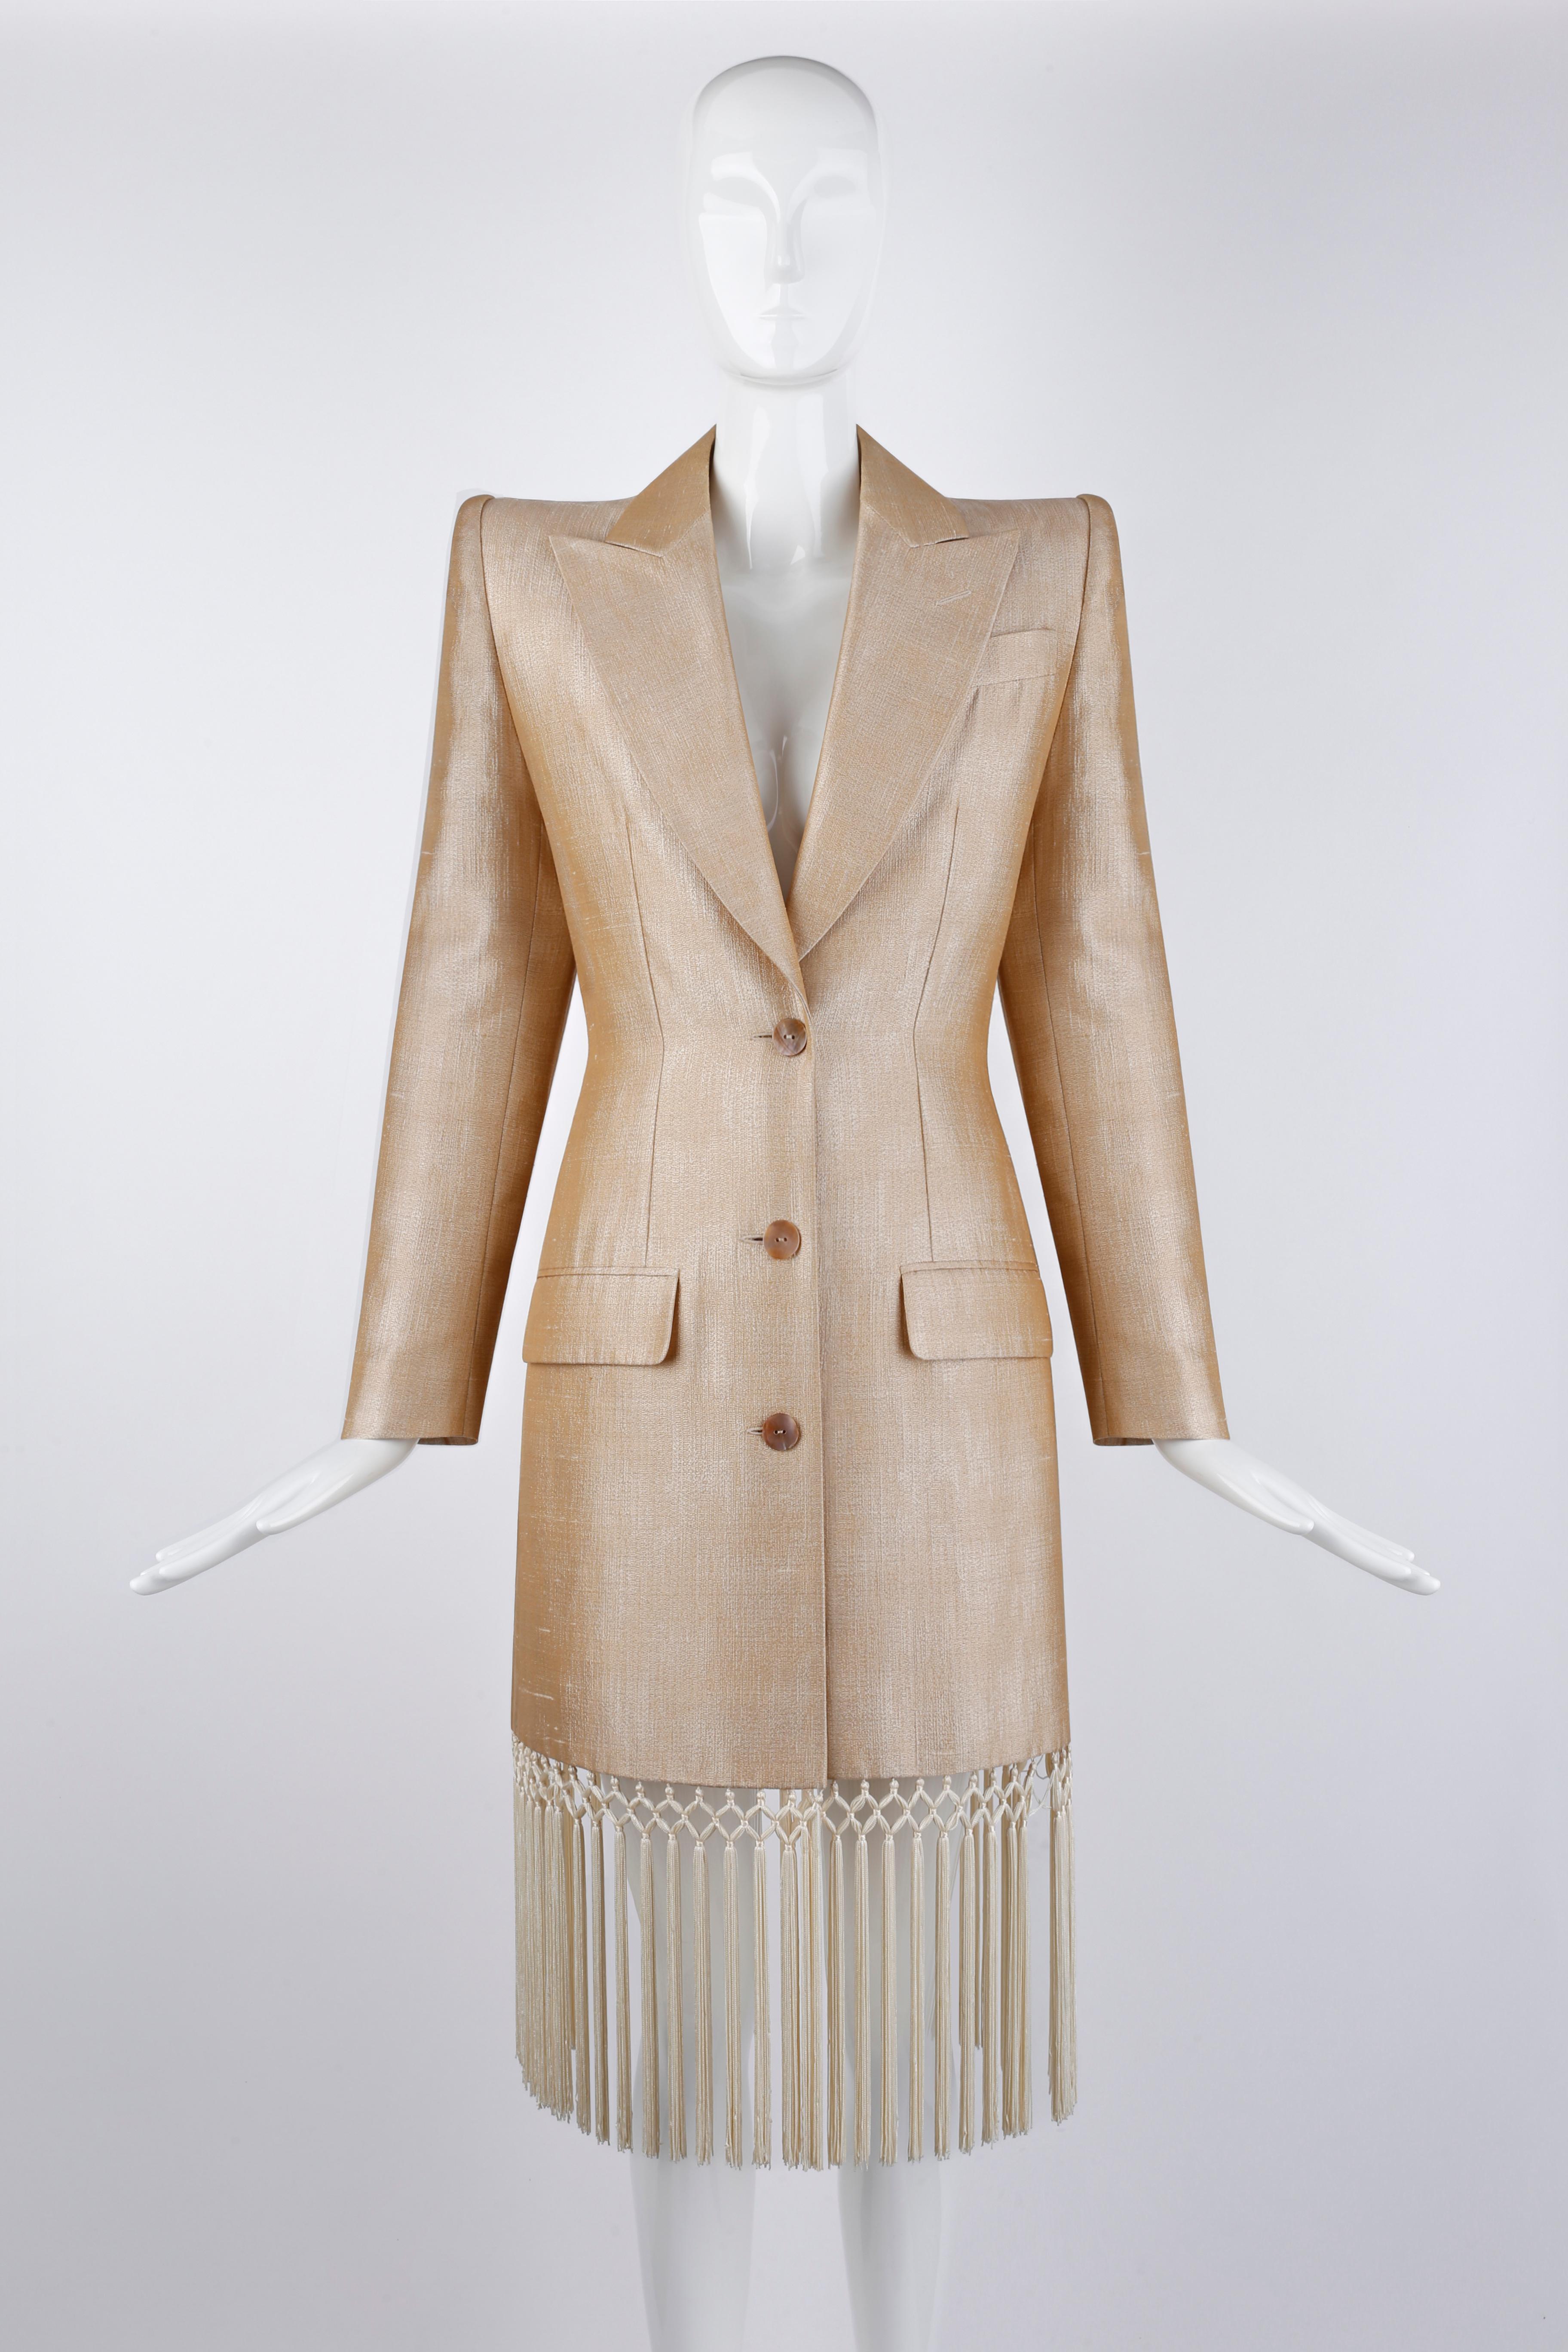 Designed by Alexander McQueen for the Givenchy Couture Spring/Summer 1998 collection. This rare dress coat features numerous tassels adorned along the entire hemline. Structured shoulders and tailored fit. Silk blend material allows for a beautiful